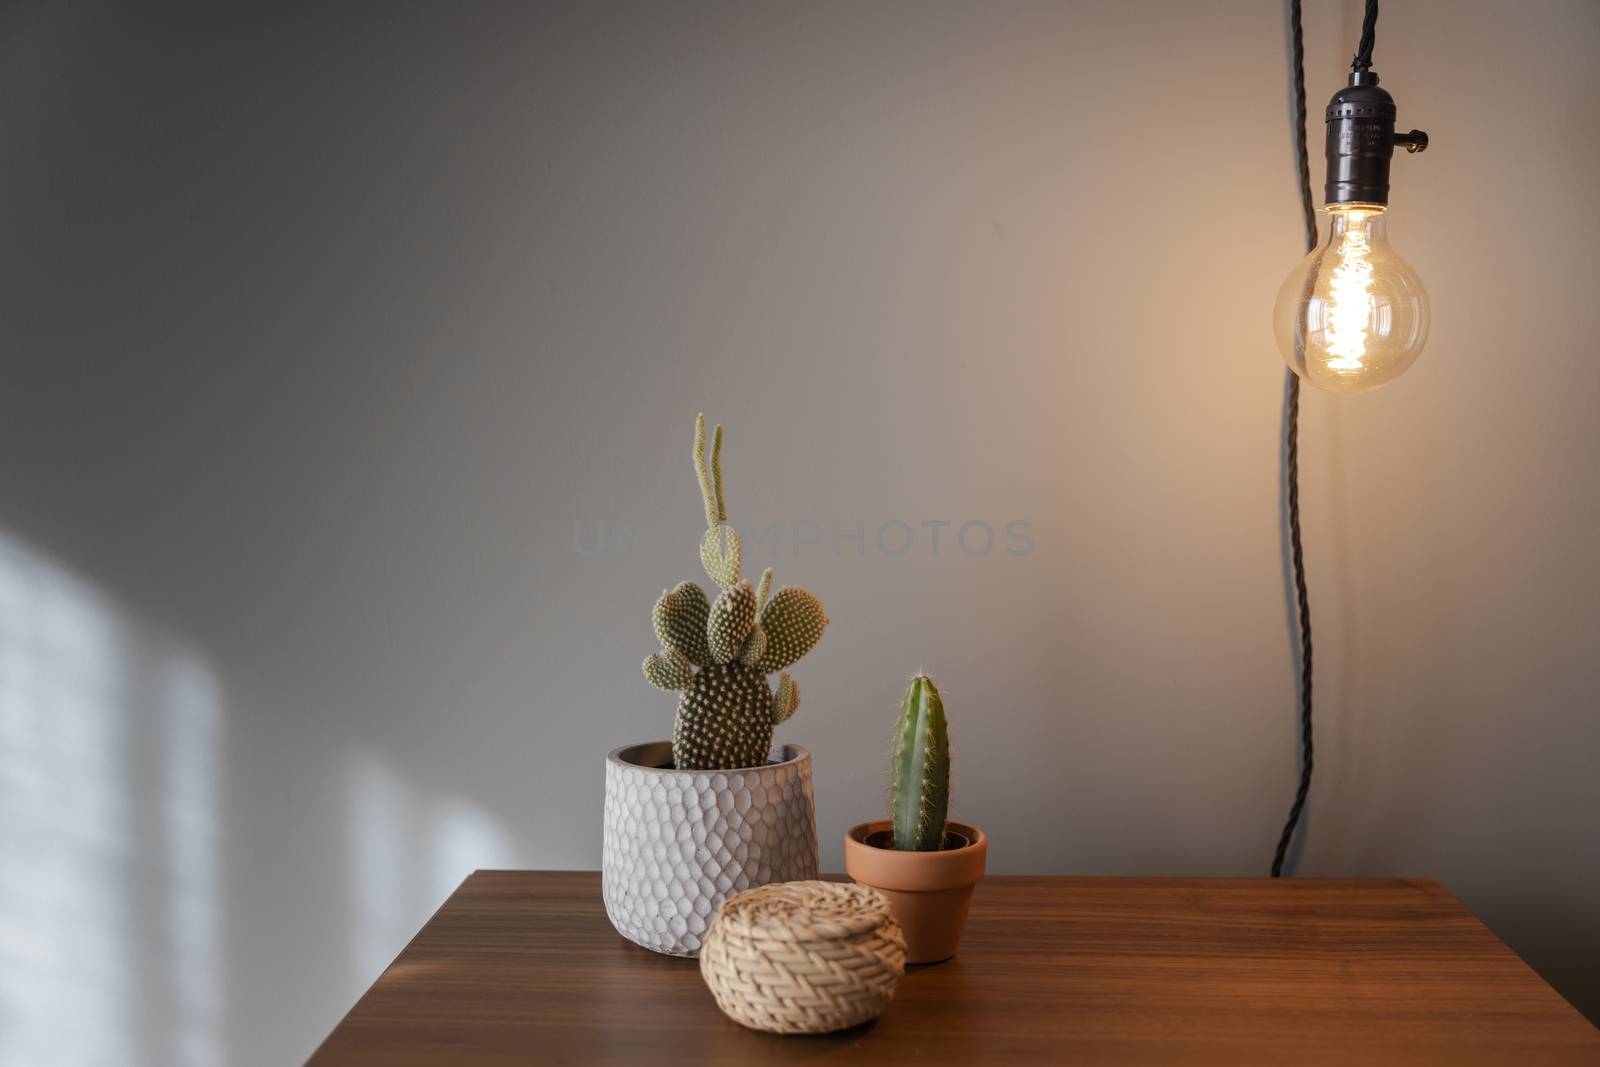 Cactus Plants decoration by Iko